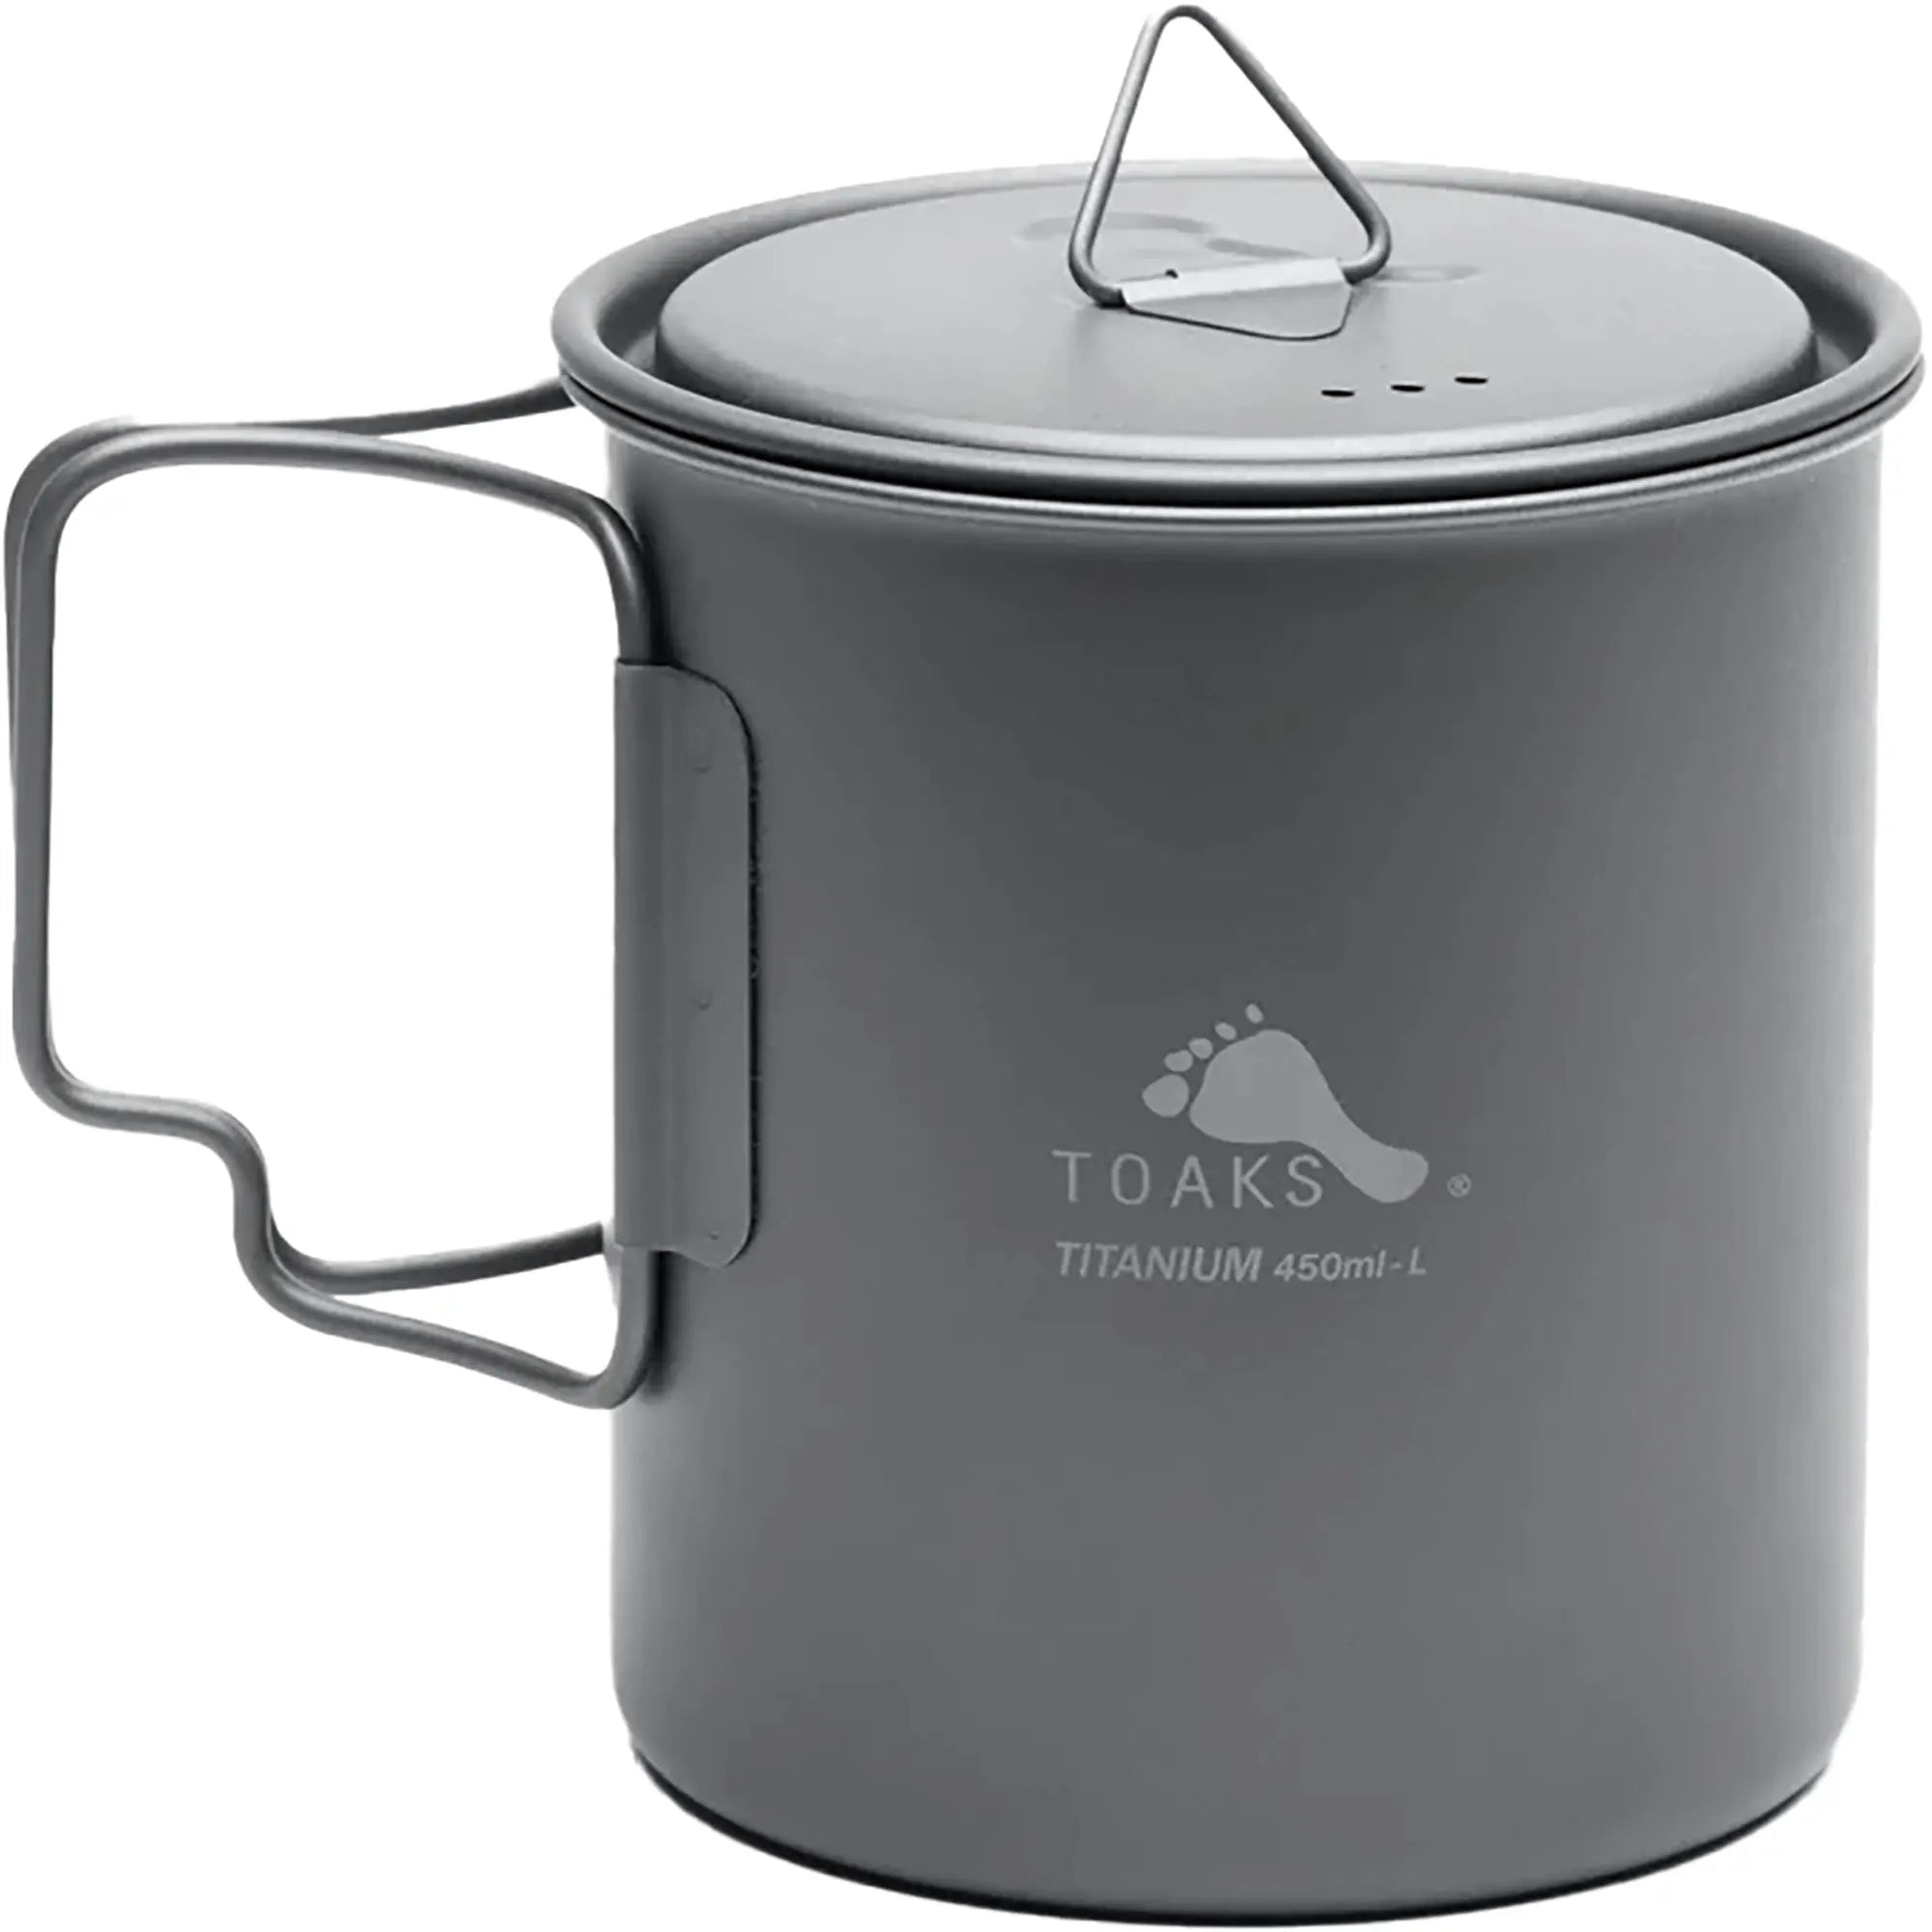 TOAKS 450ml Ultralight Titanium Cup with Lid - CUPLID450 - Outdoor Camping TOAKS